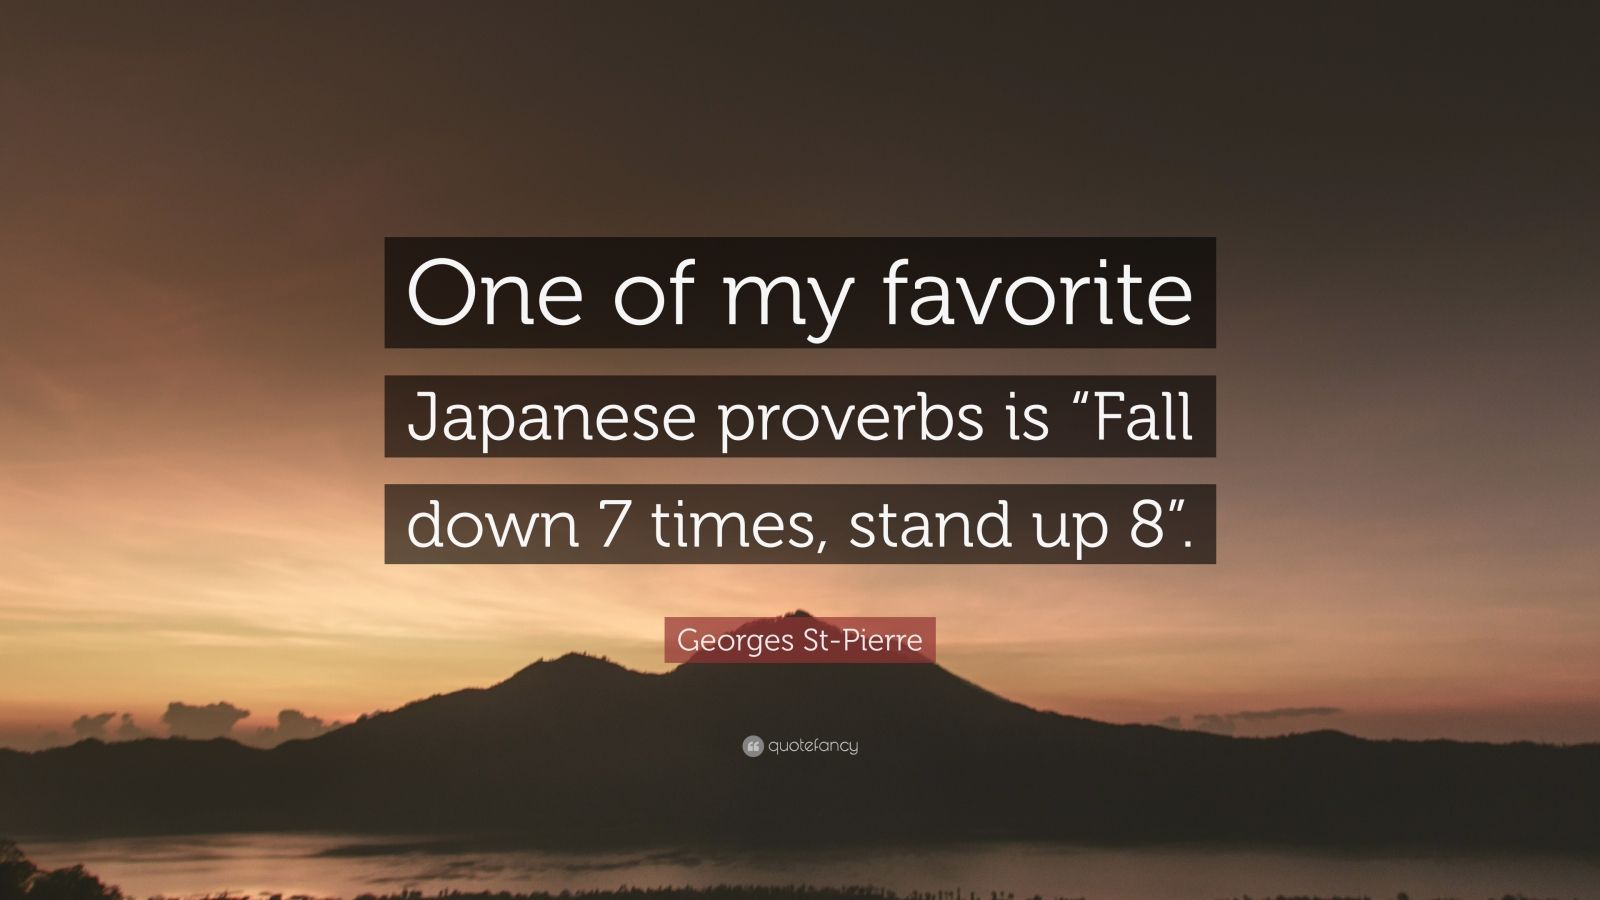 Georges St-Pierre Quote: “One of my favorite Japanese proverbs is “Fall